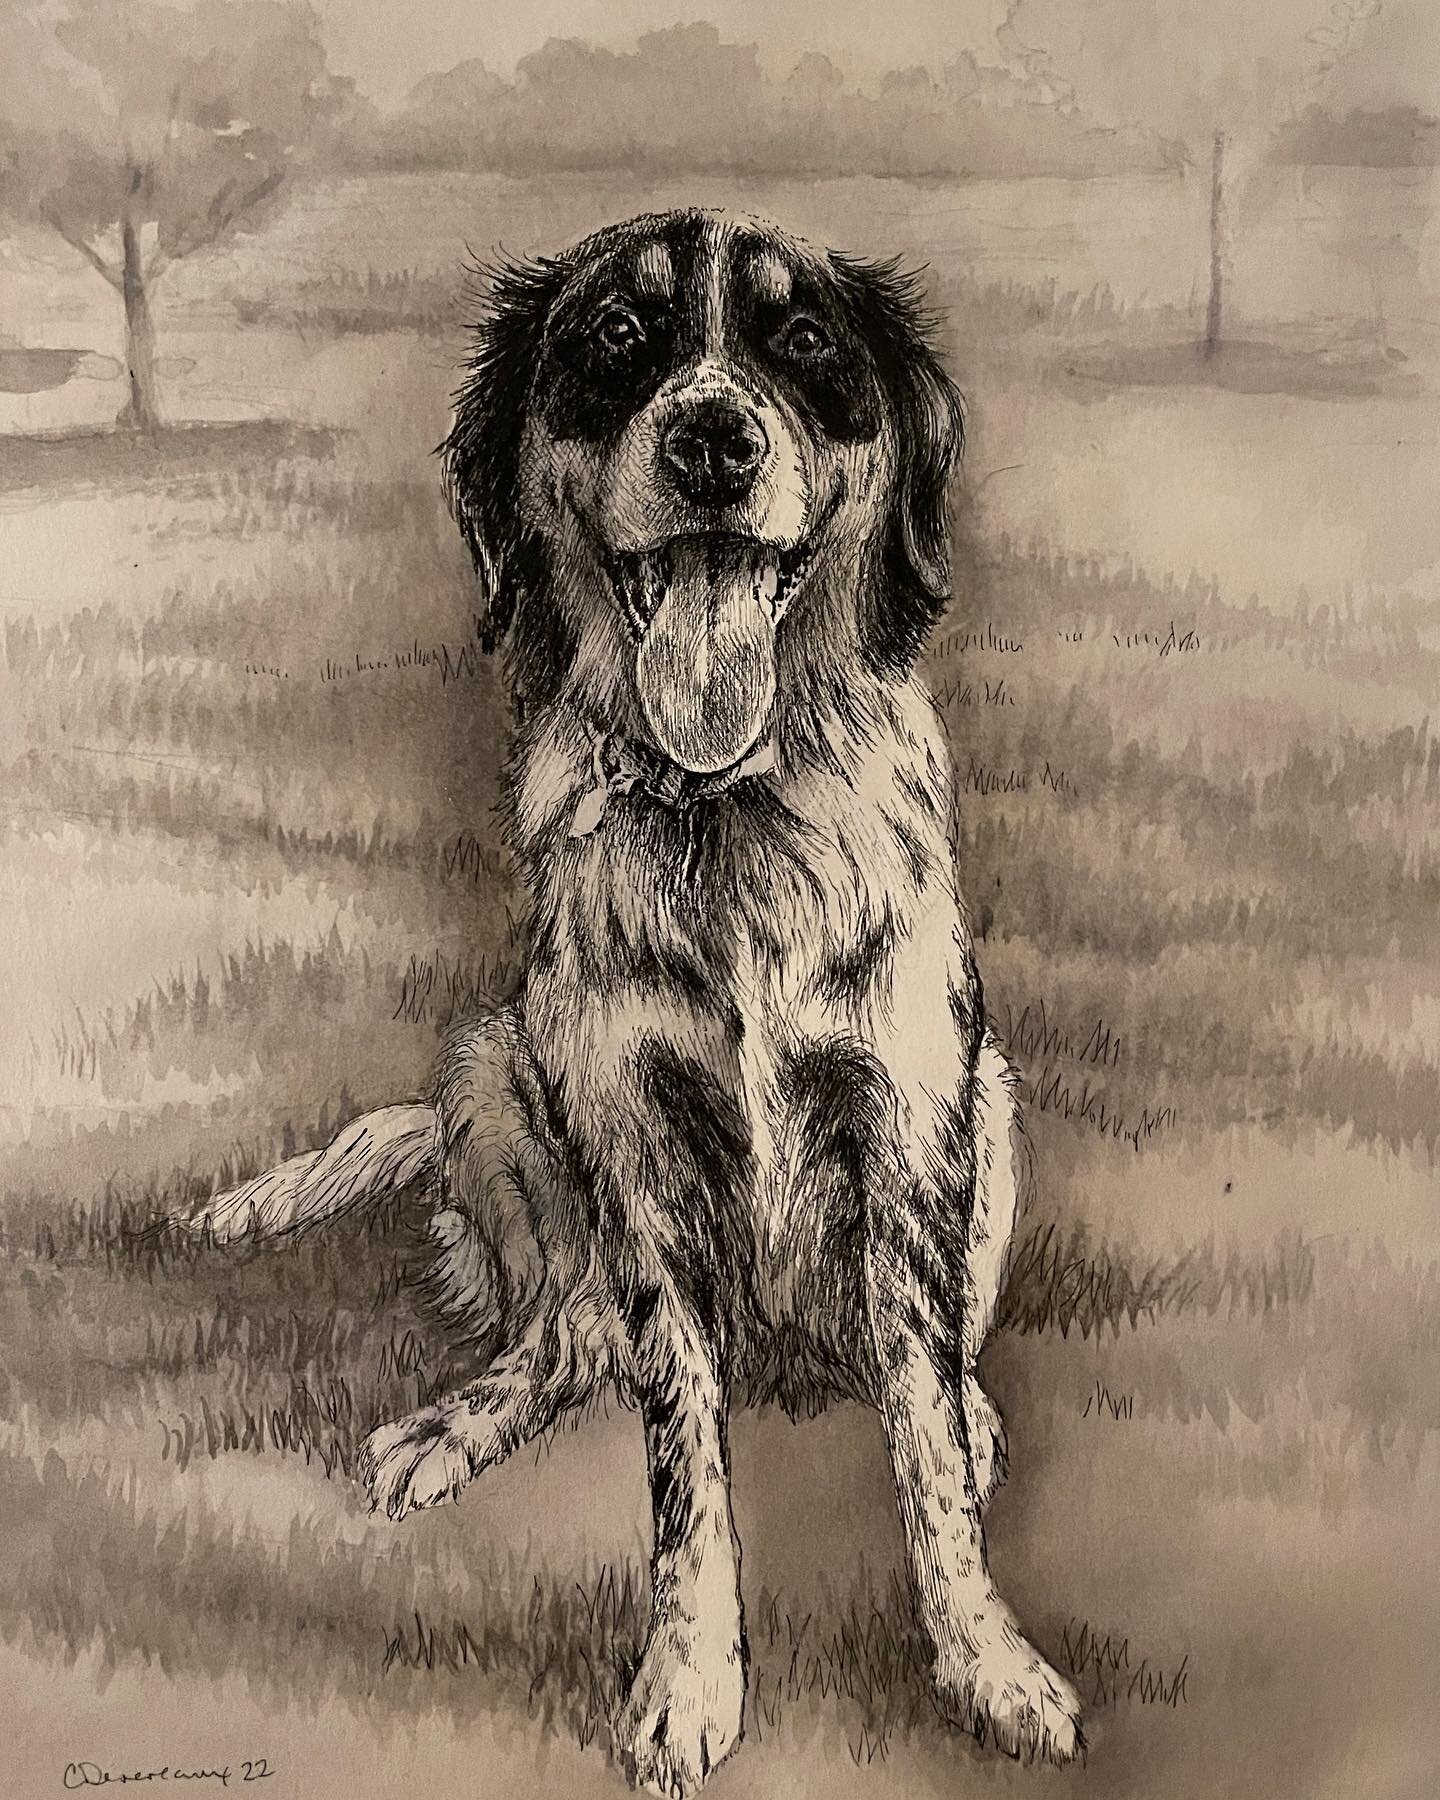 A doggo from earlier this year. 

#petportrait #dogart #dogartwork #inkdrawing #inkwash #micron #commission